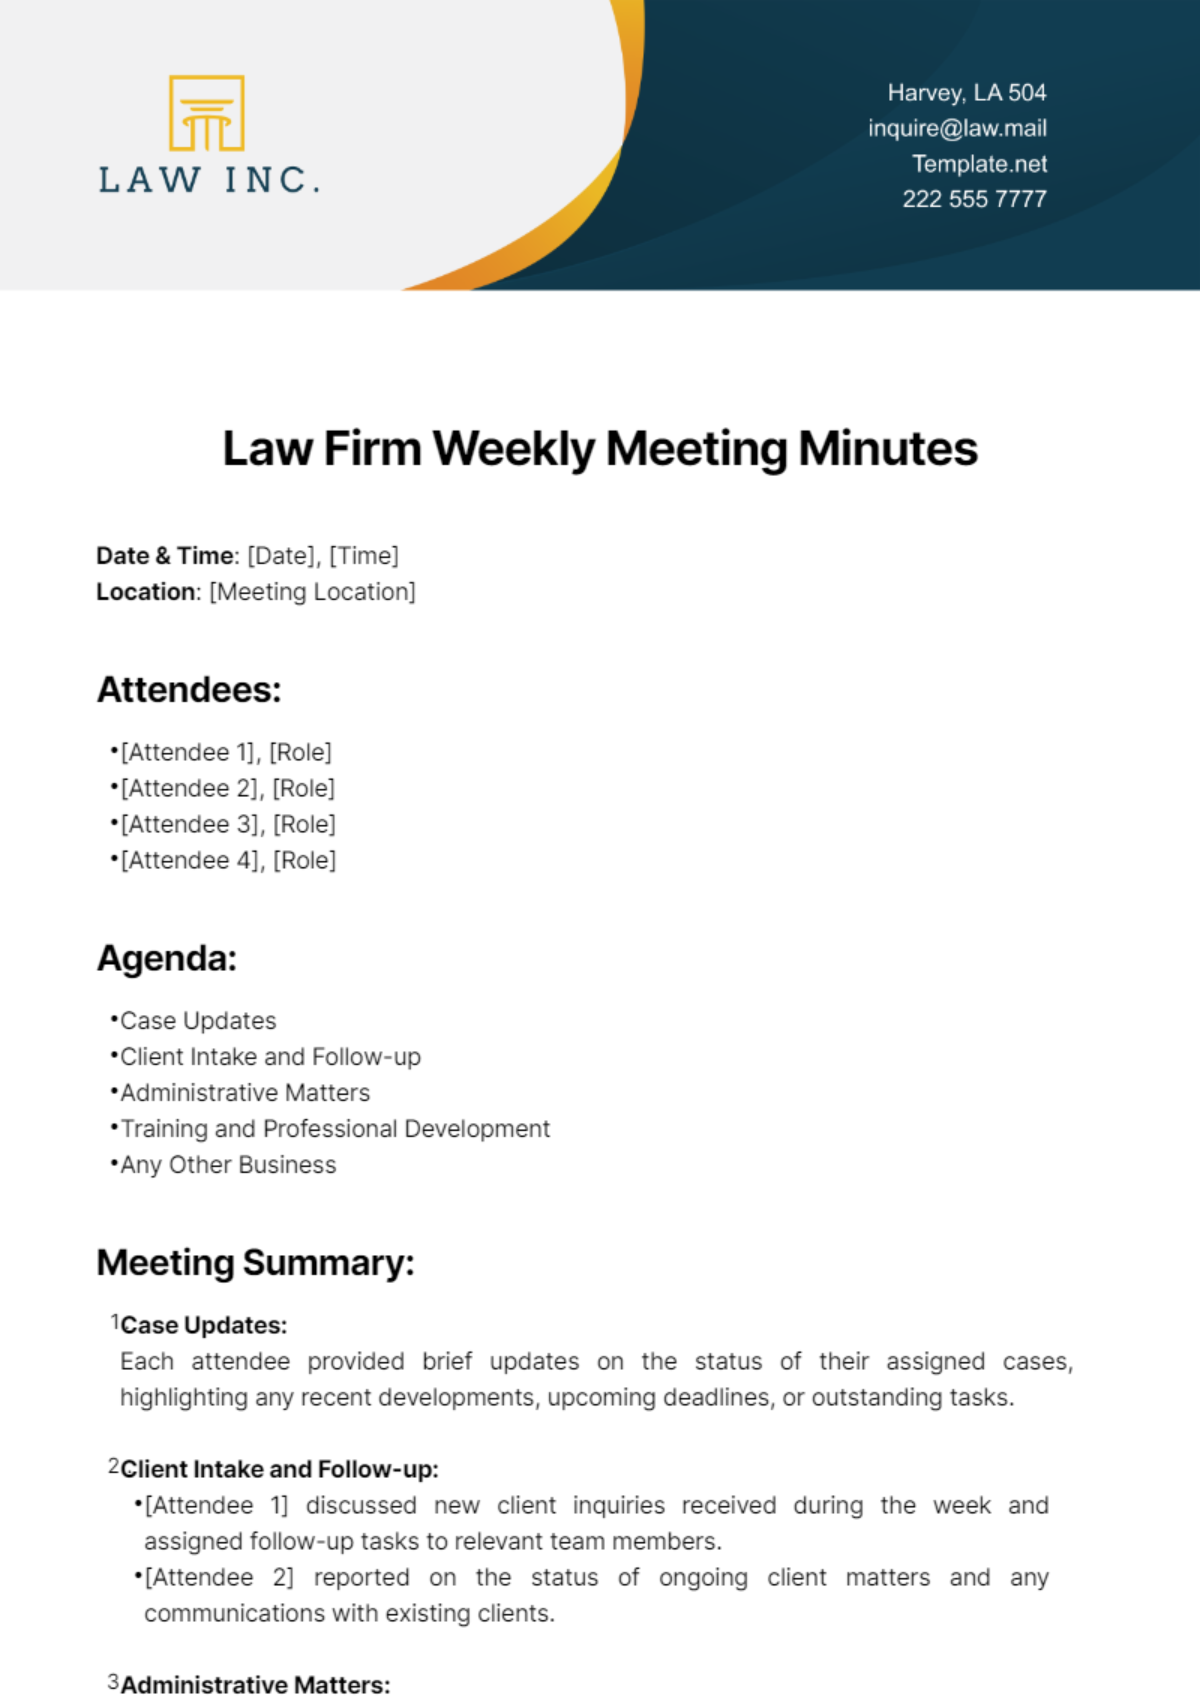 Law Firm Weekly Meeting Minutes Template